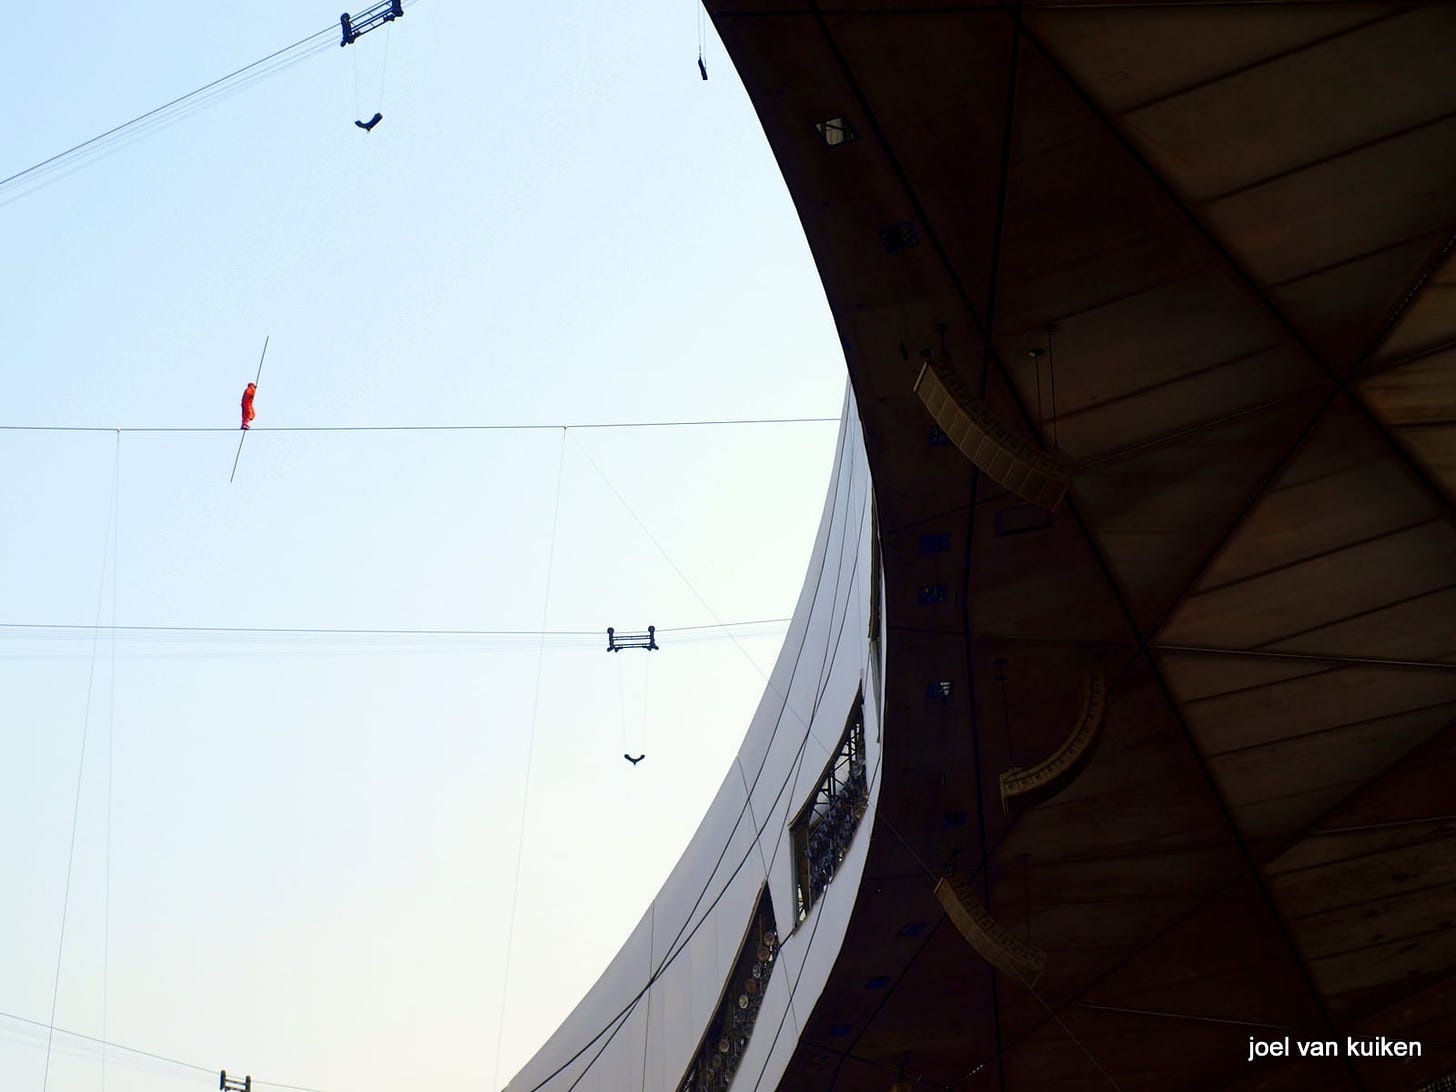 Man in red suit tightrope walking across a stadium. 